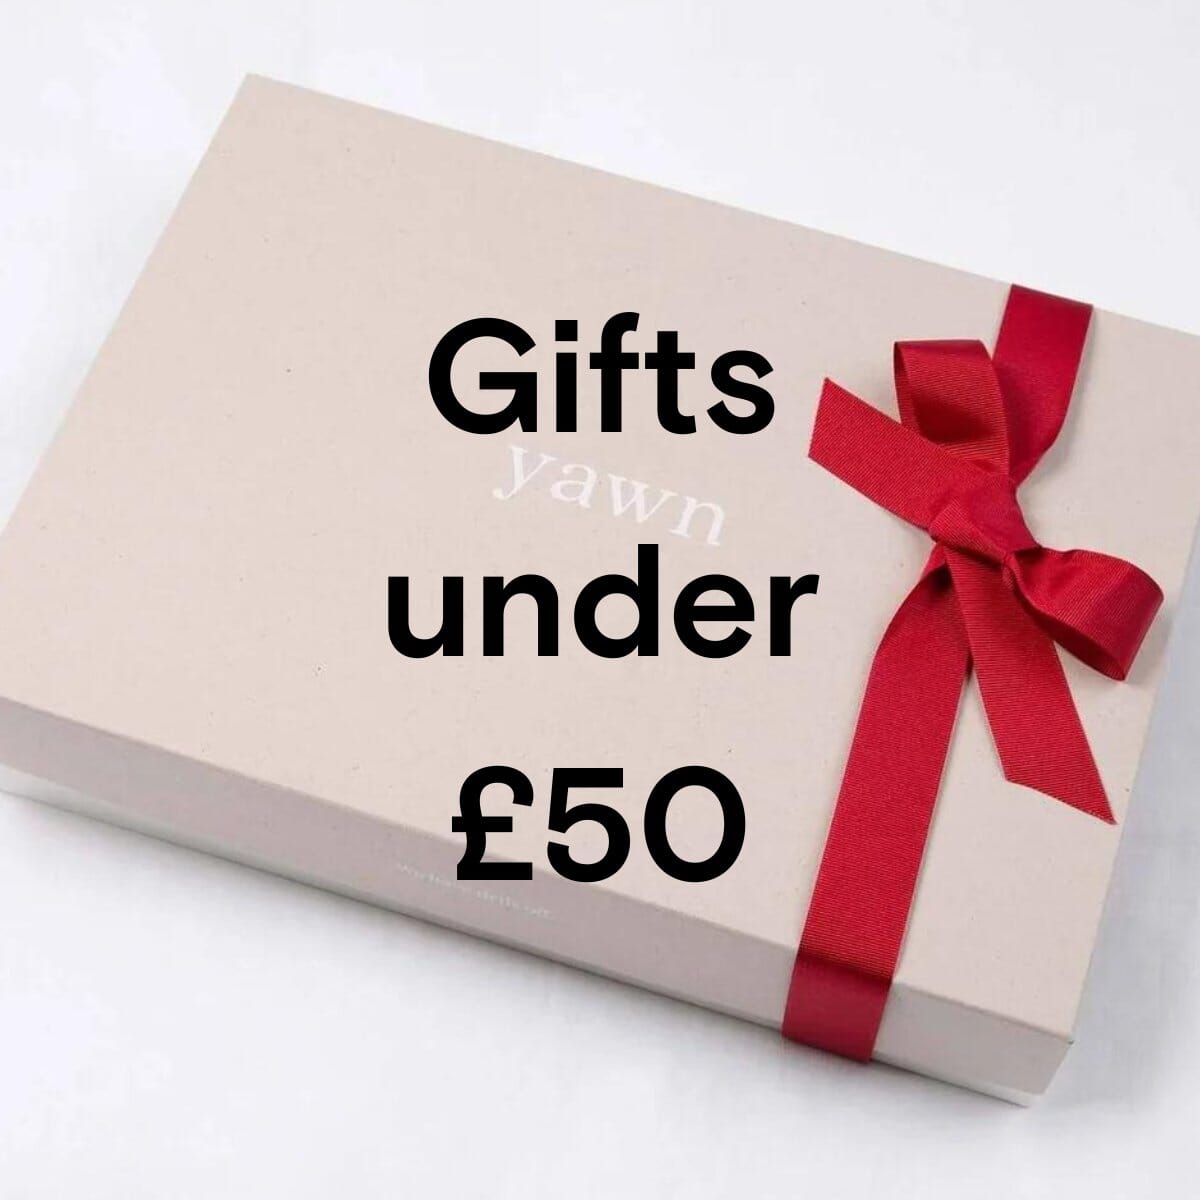 Relaxing gifts under £50